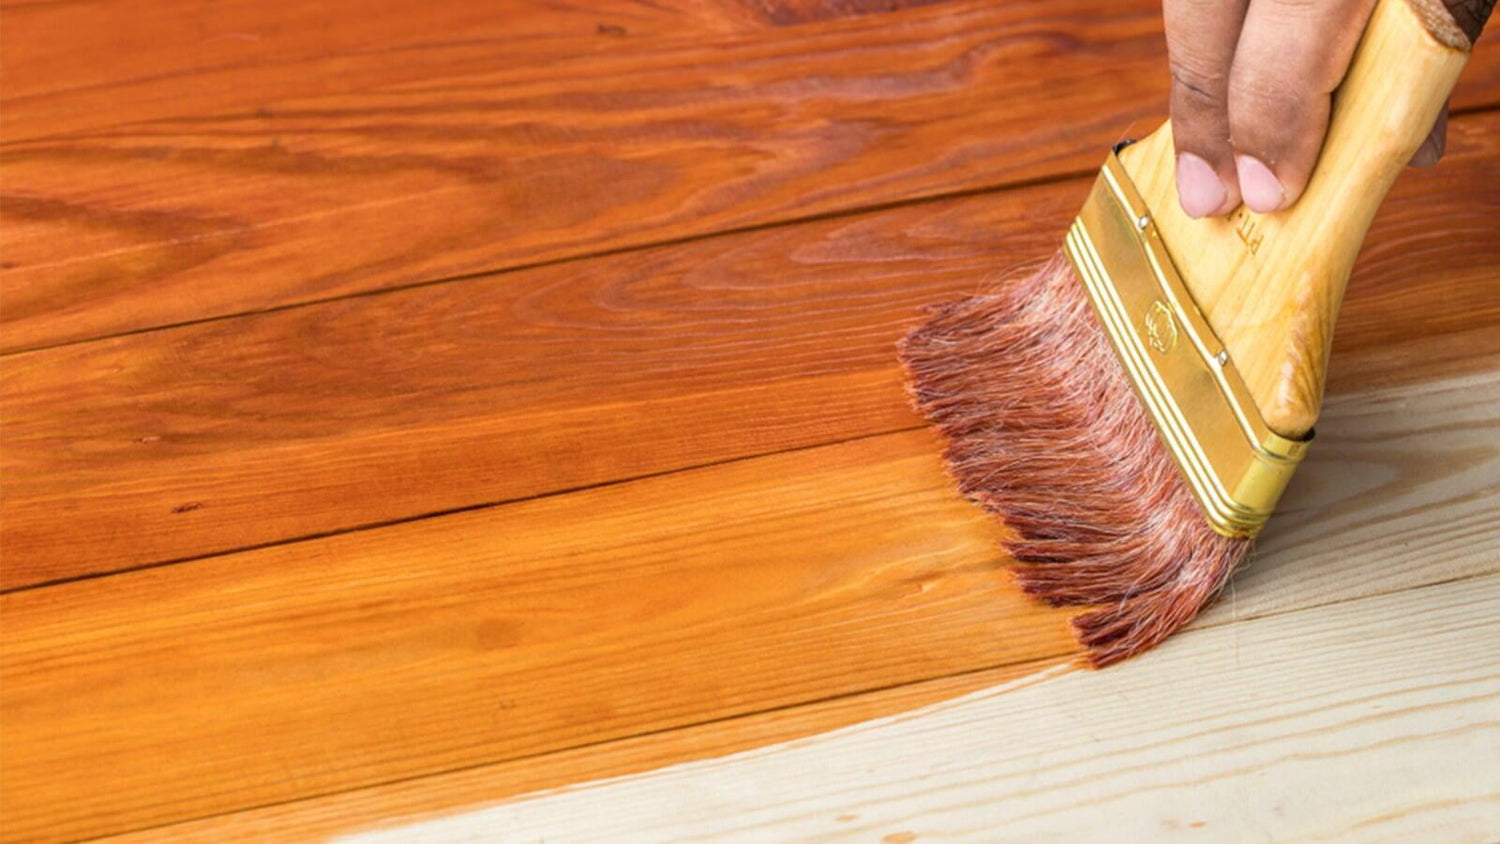 Order now: Star Wood Shield, the best paint for wood. Enjoy self-cleaning, and scratch resistance.